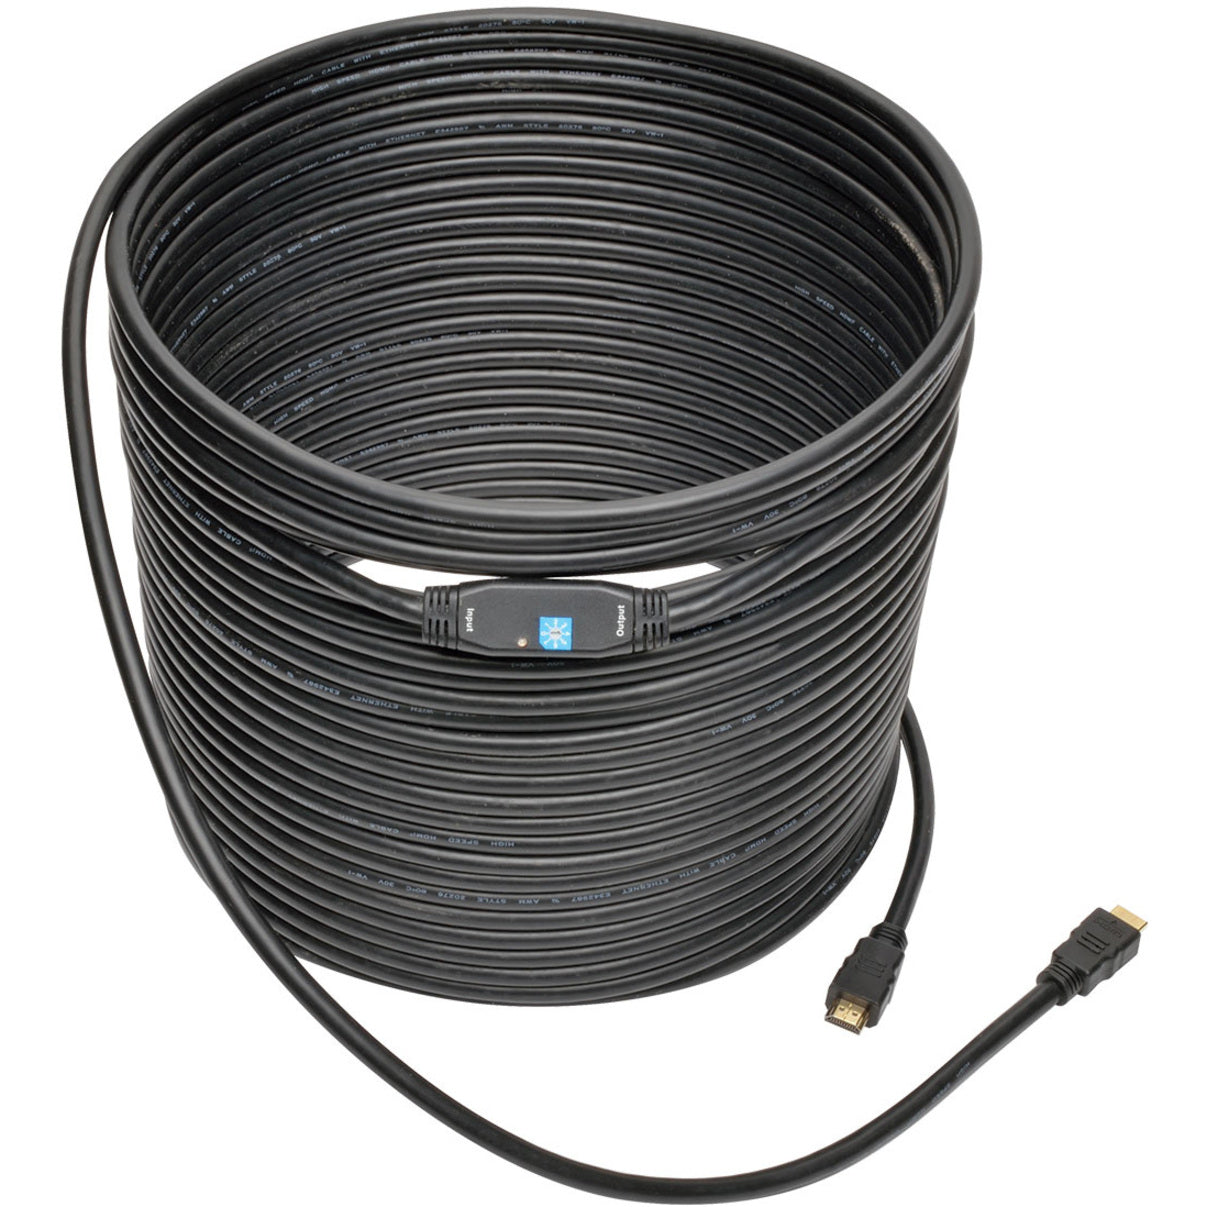 Tripp Lite P568-080-ACT HDMI A/V Cable Active High-Speed 80 ft. Black  トリップライト P568-080-ACT HDMI A/Vケーブル、アクティブハイスピード、80フィート、ブラック